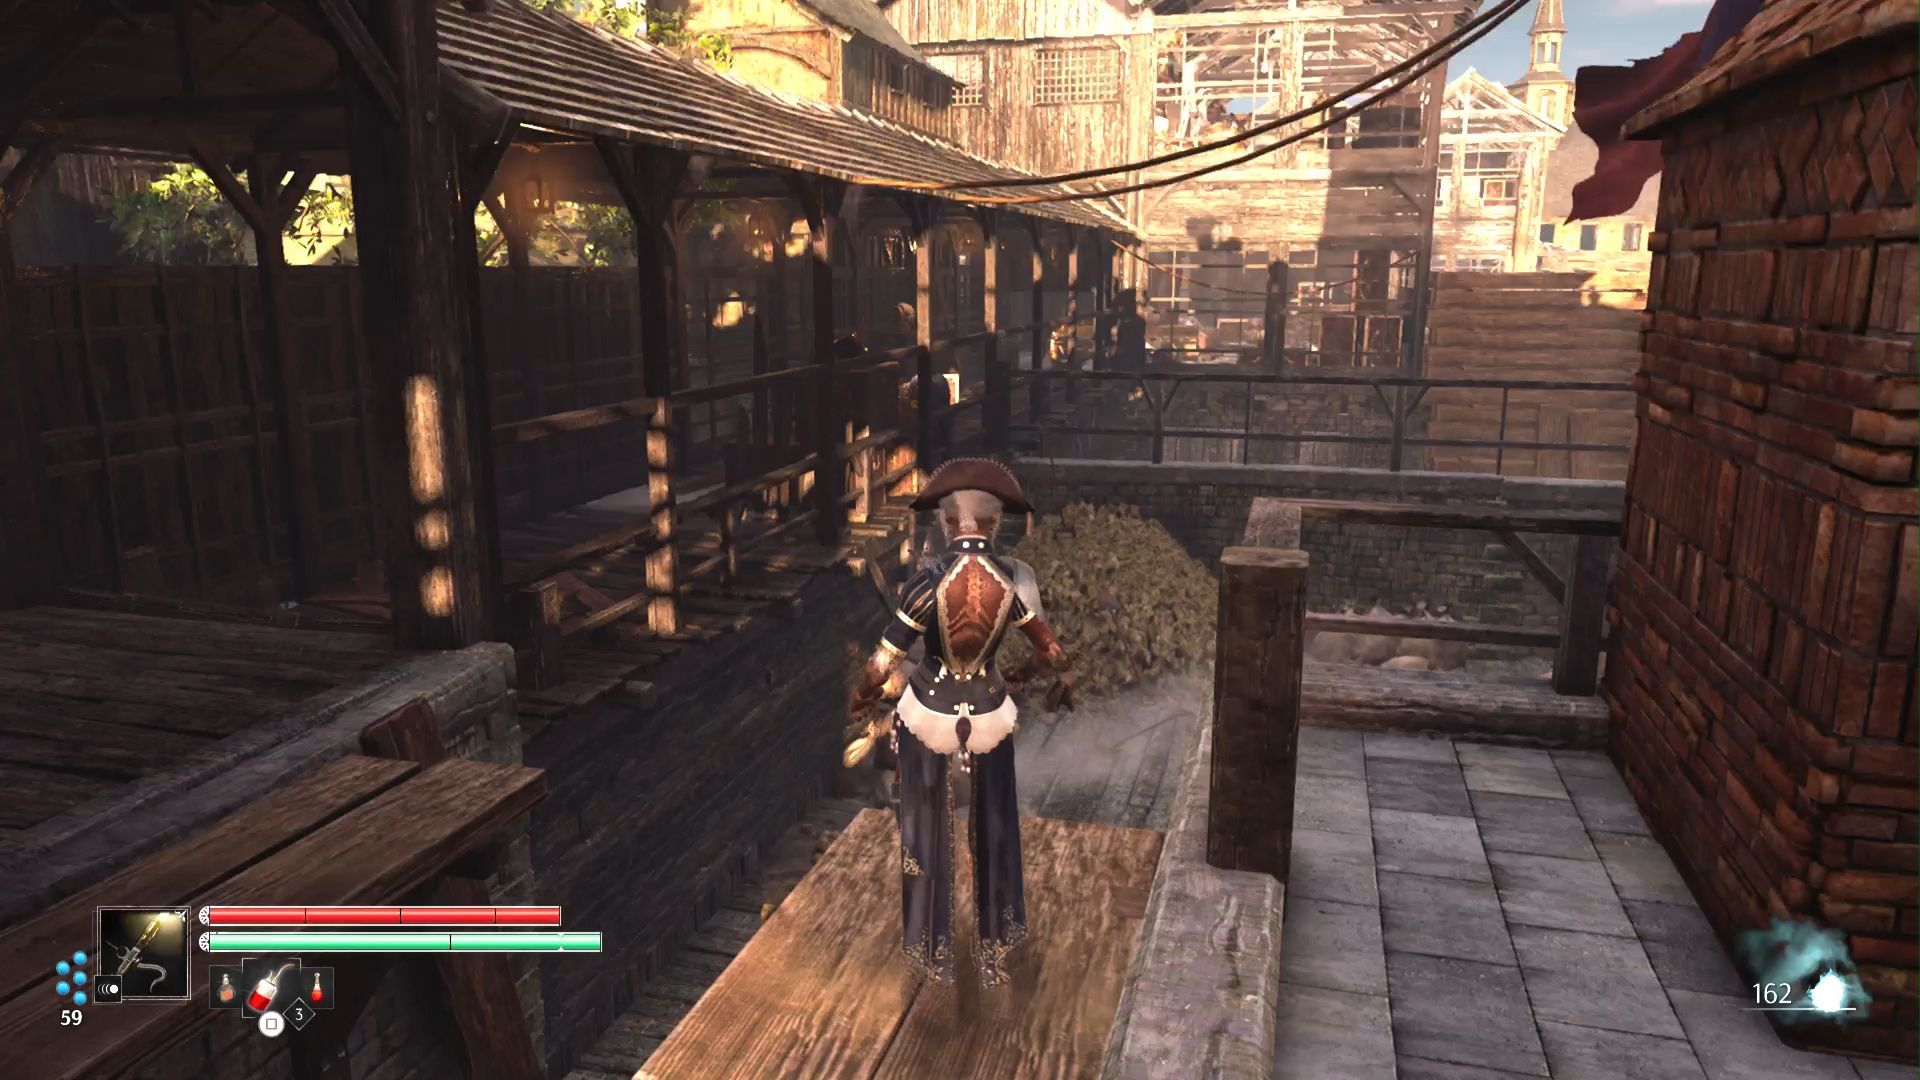 A screen shot from the PS5 version of Steelrising showing Aegis overlooking some wooden structures